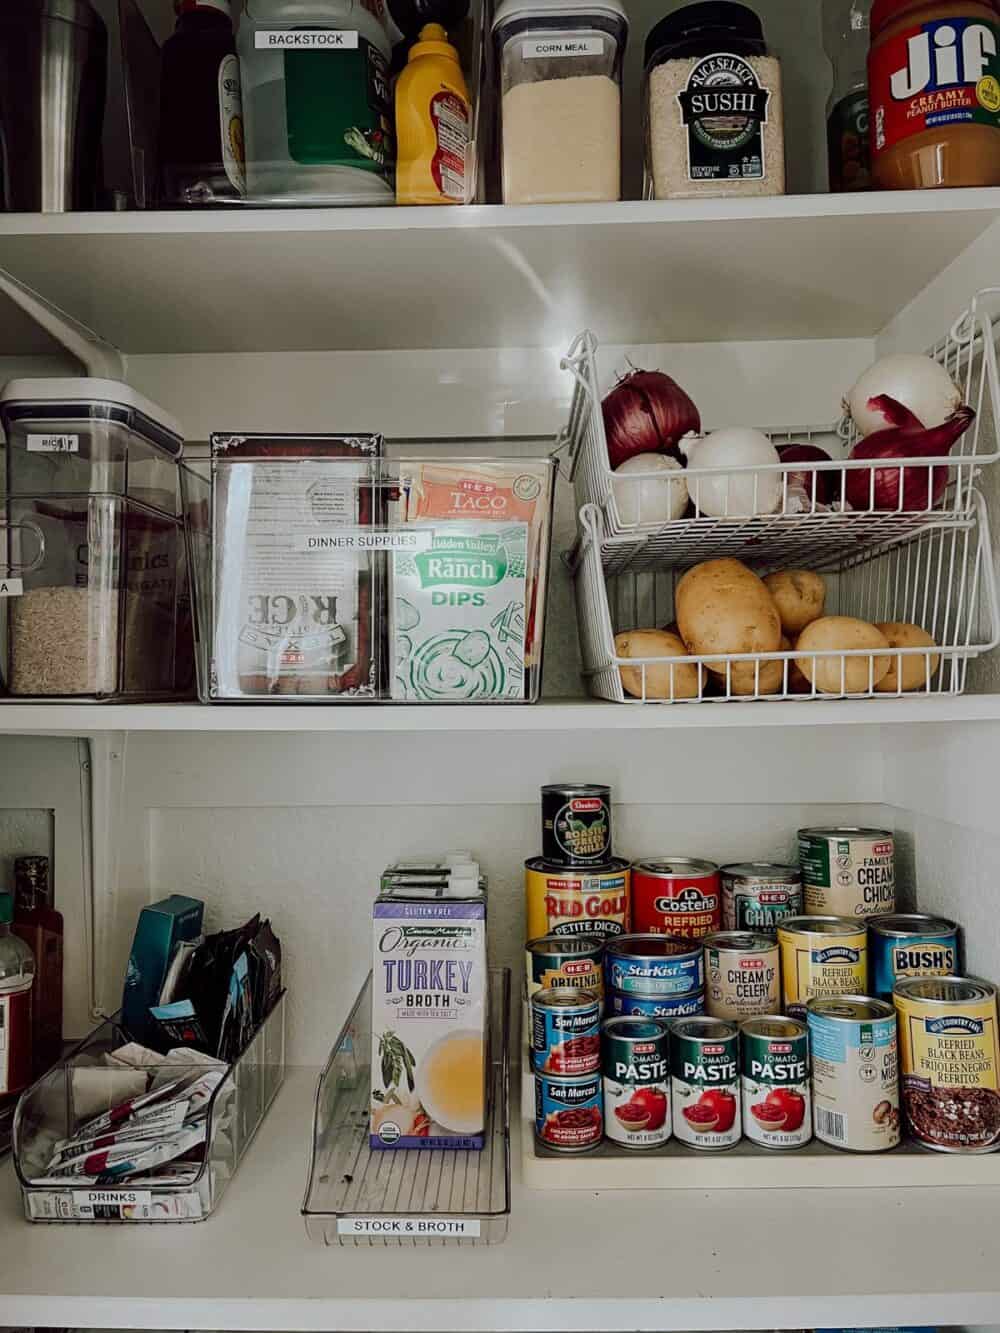 Kitchen Pantry Organization Ideas: Simple and Easy to Maintain